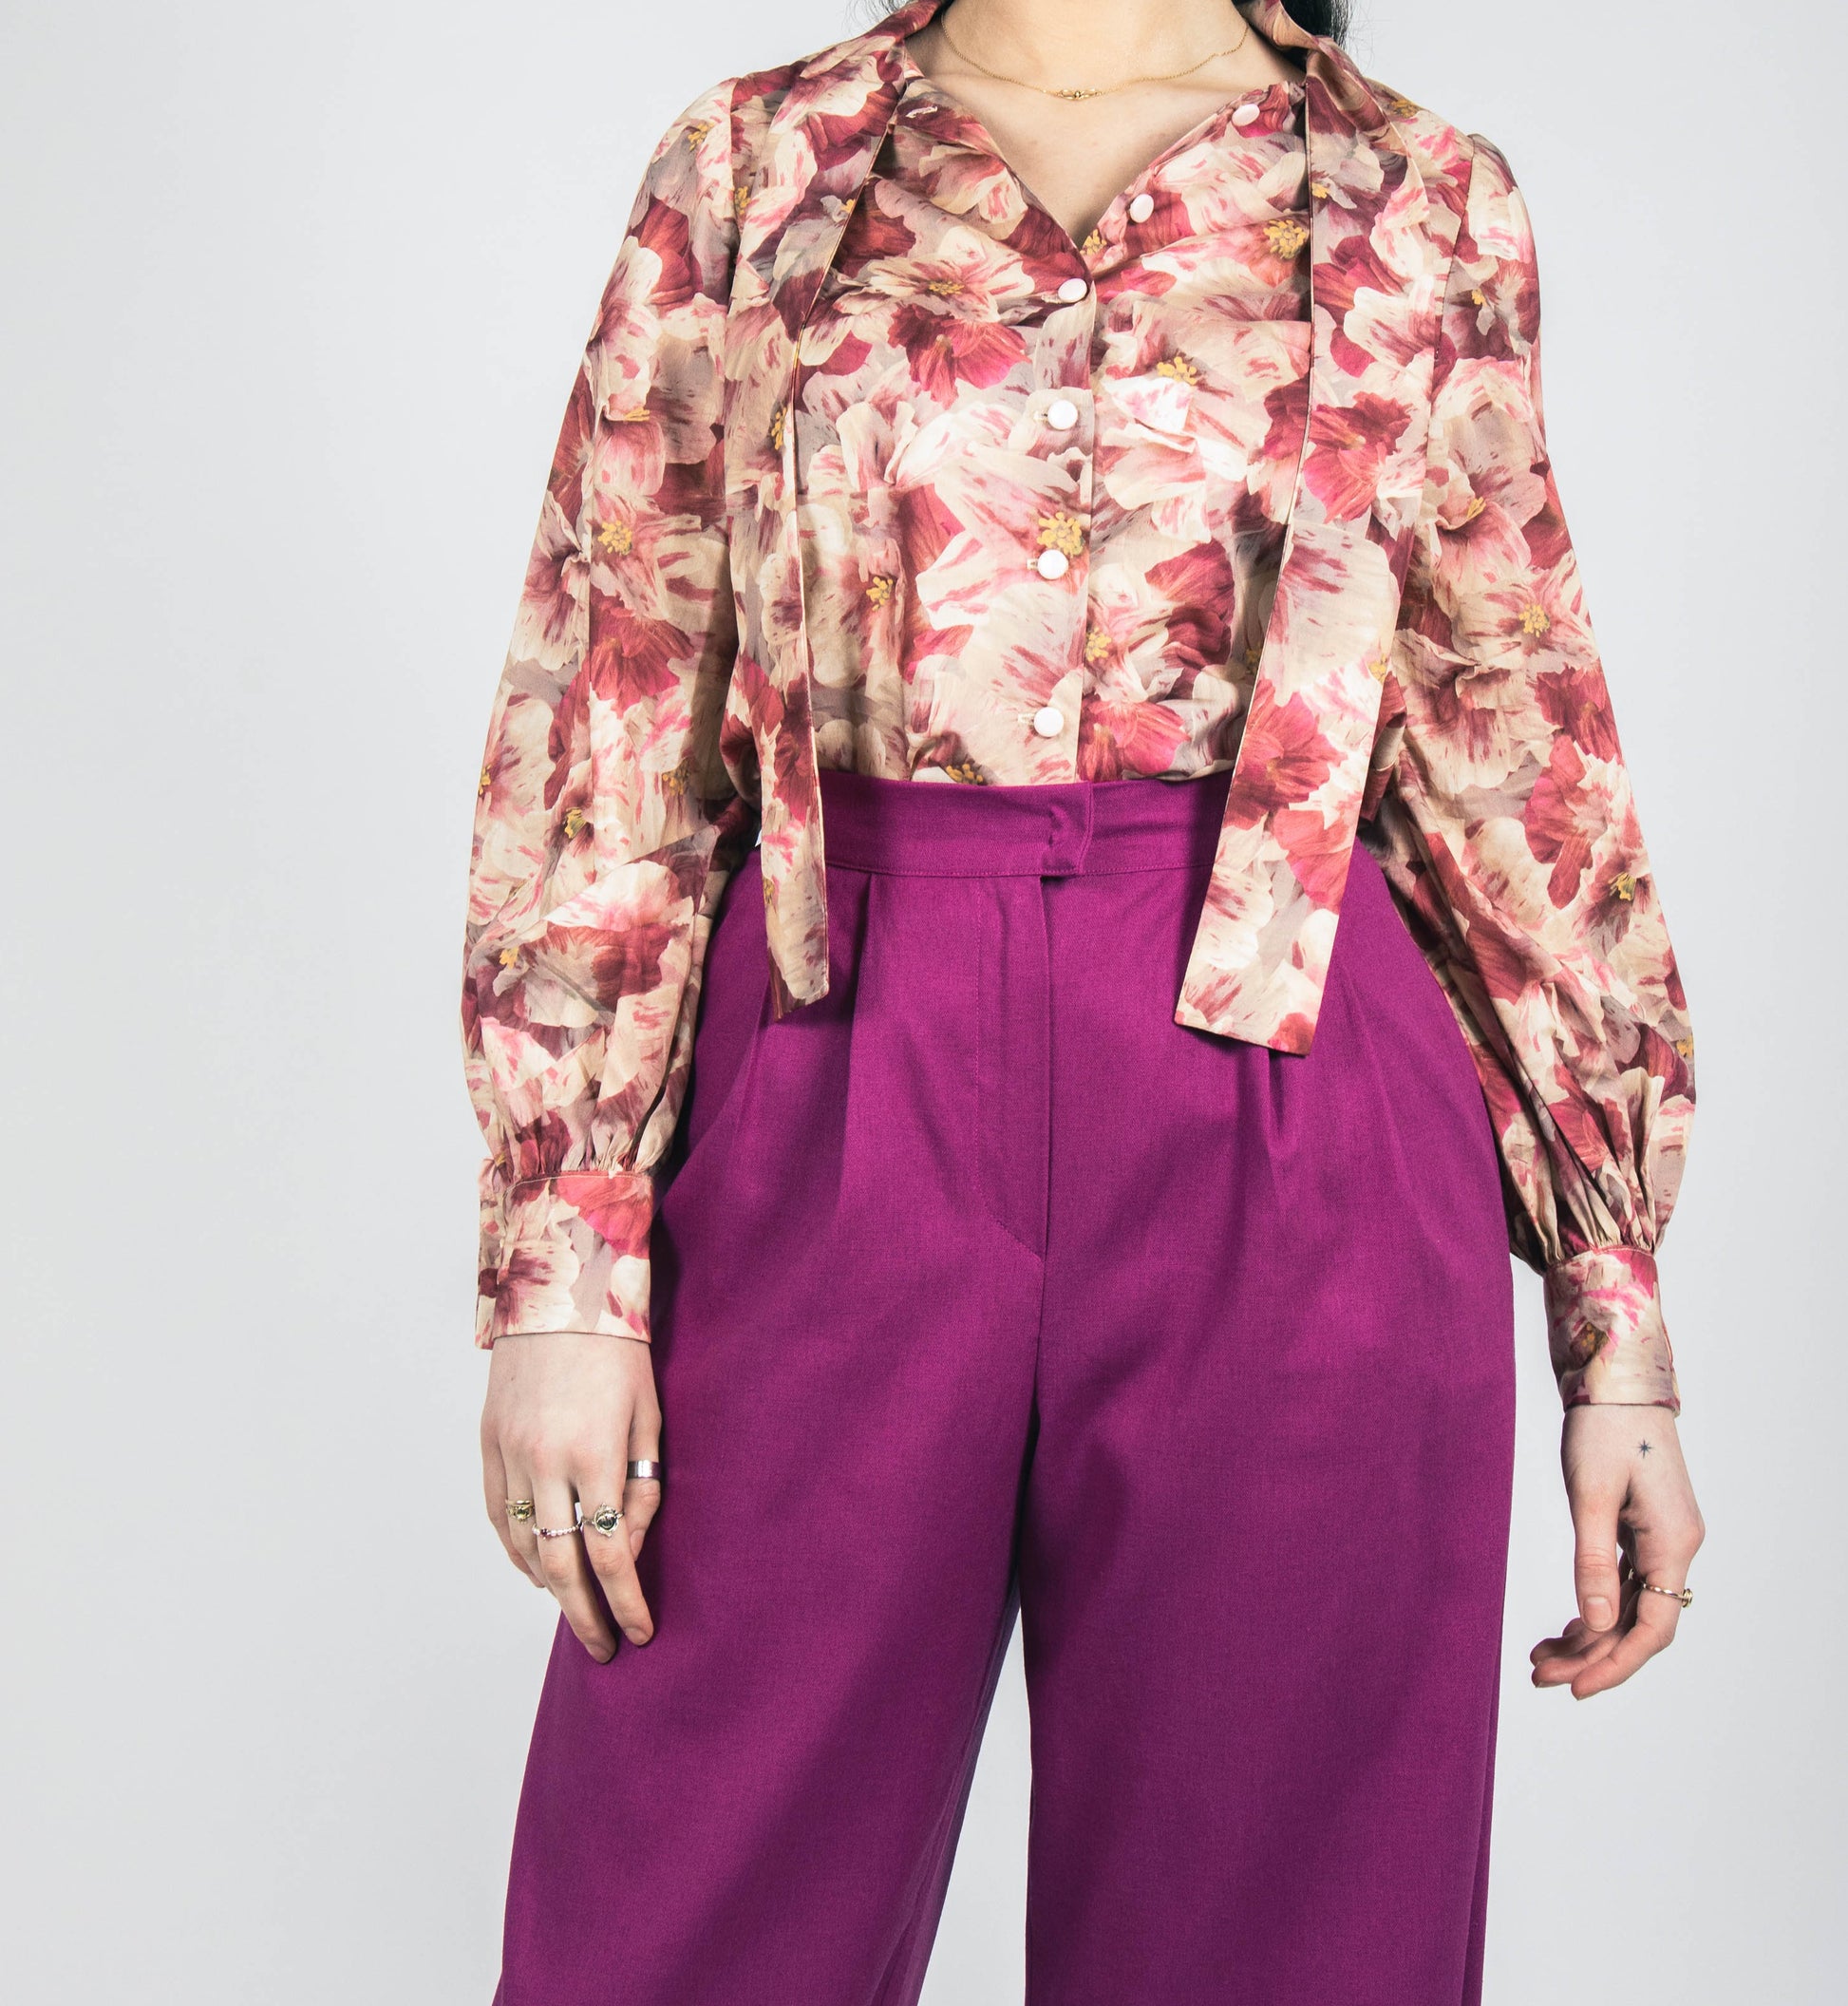 plum wide leg trouser and button down shirt with pussy cat bow neck tie